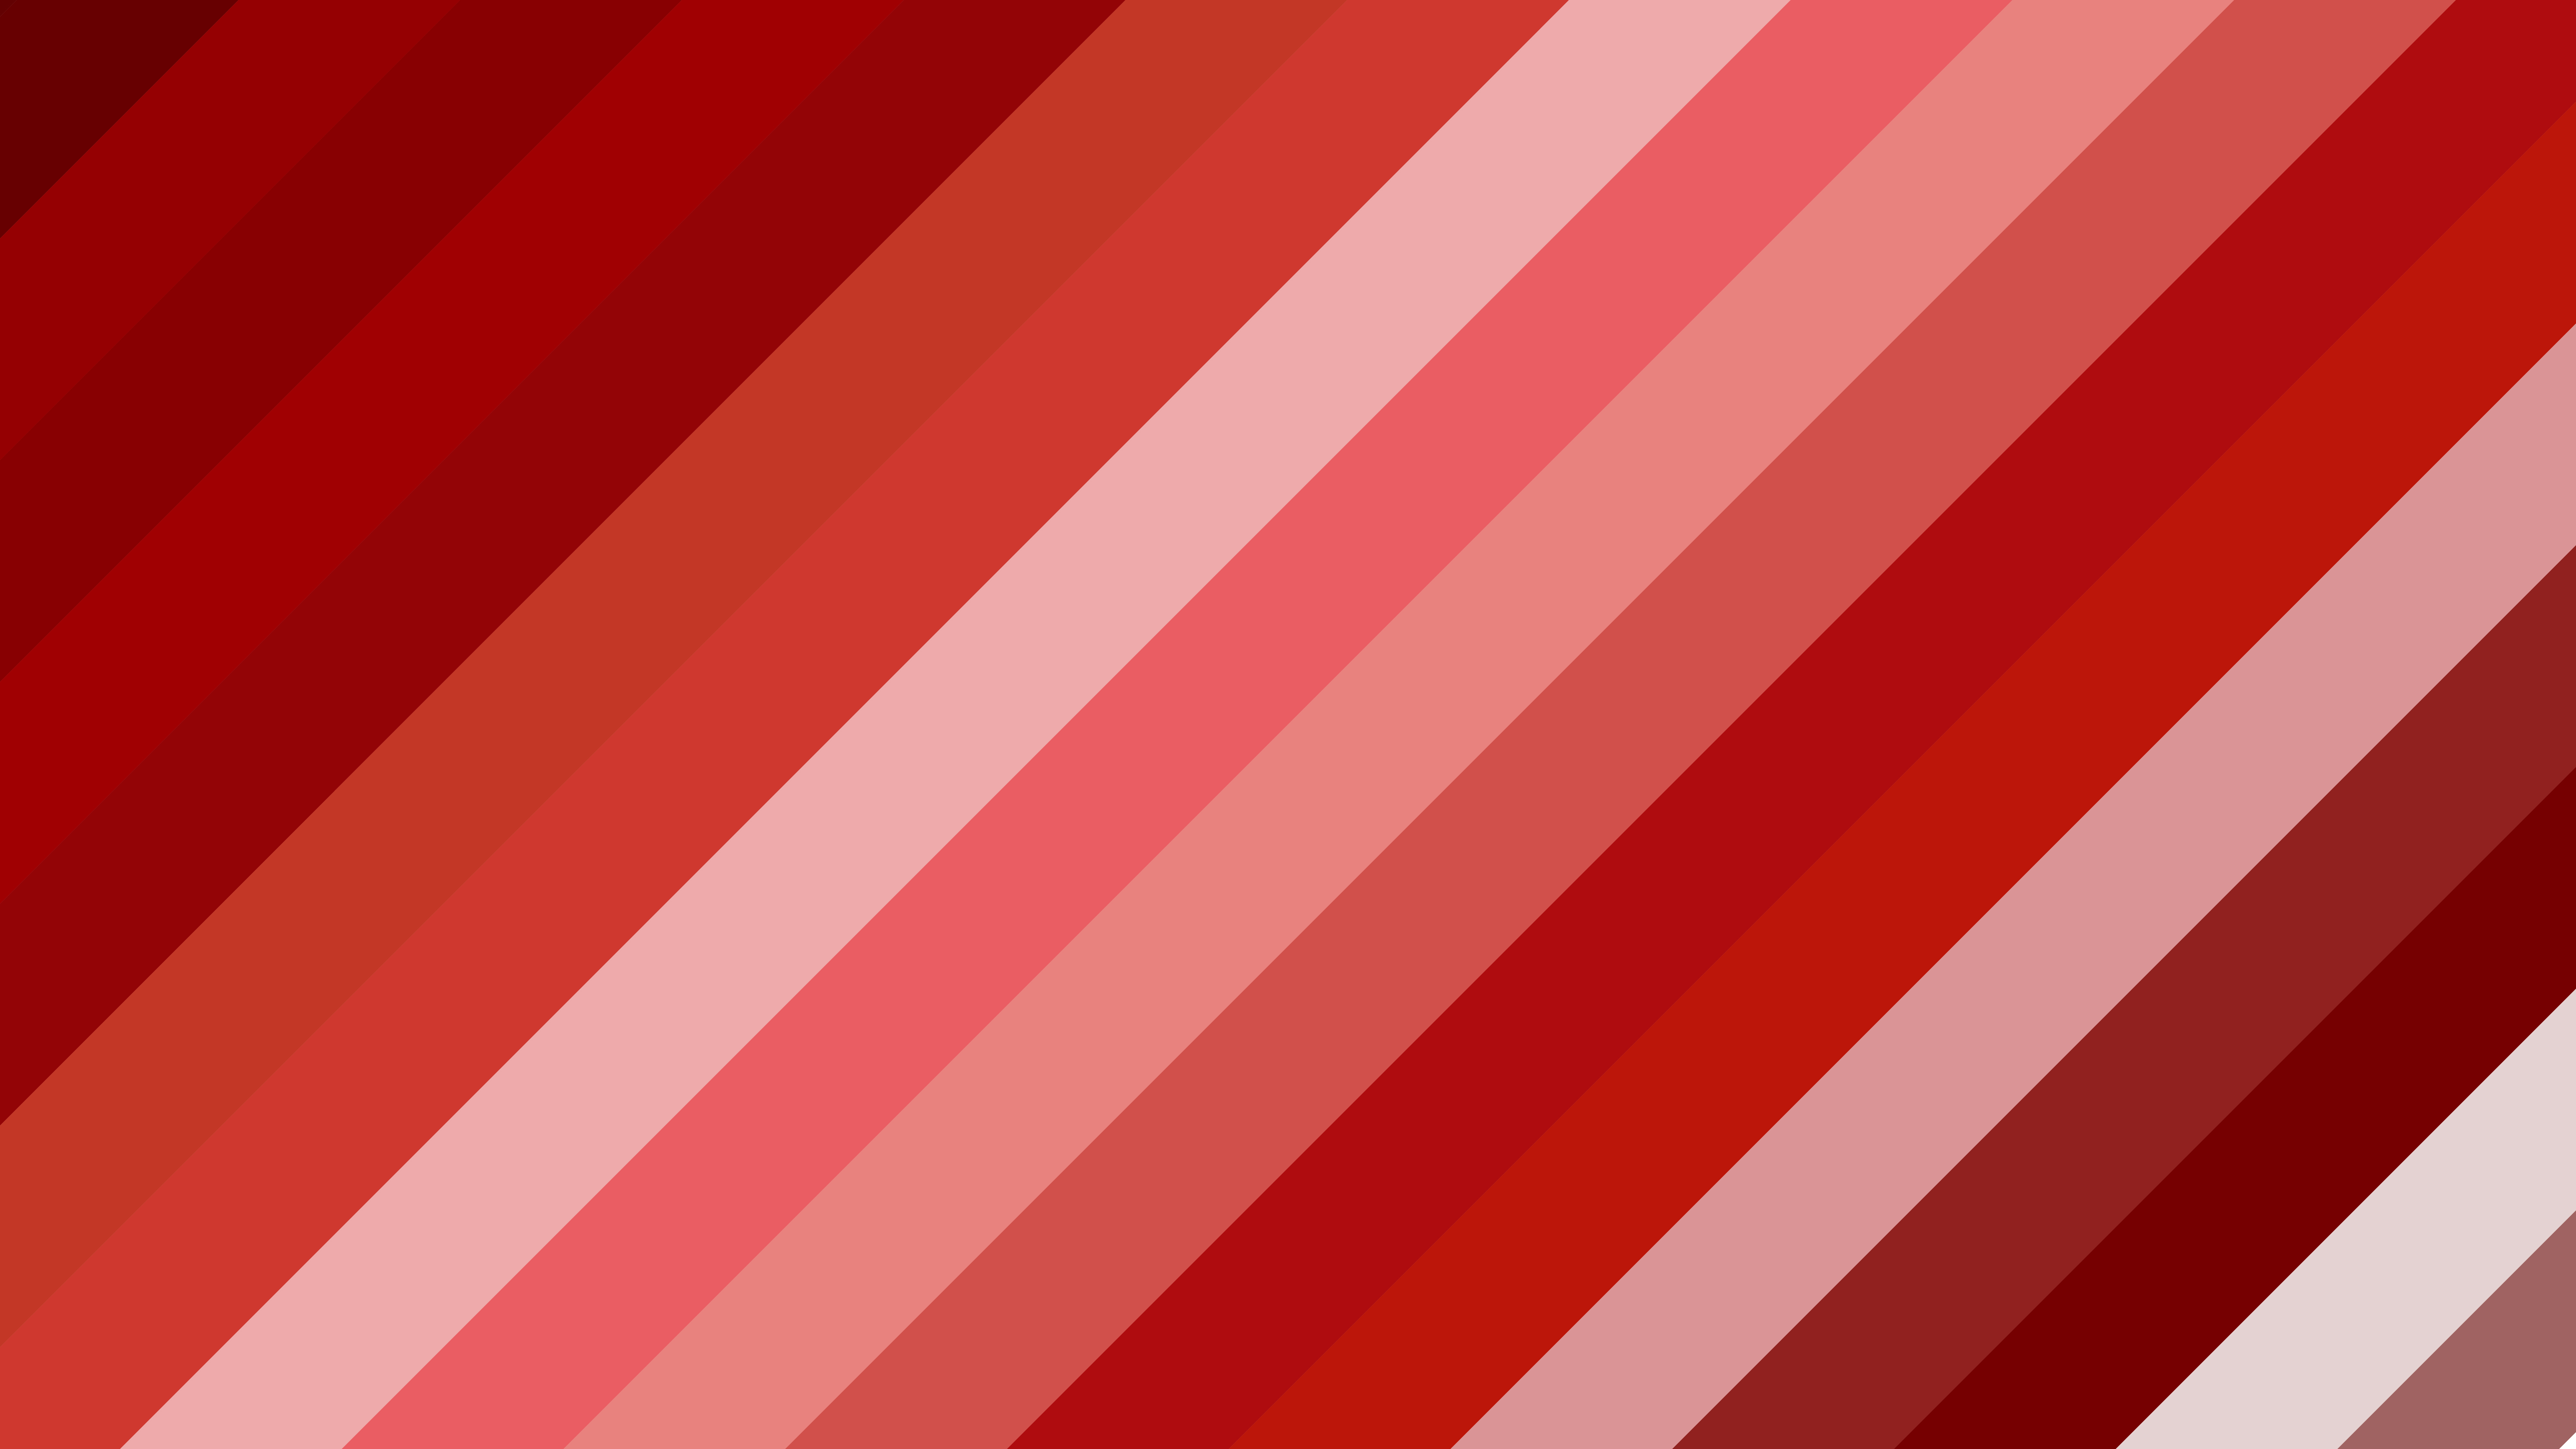 Free Red Diagonal Stripes Background Graphic